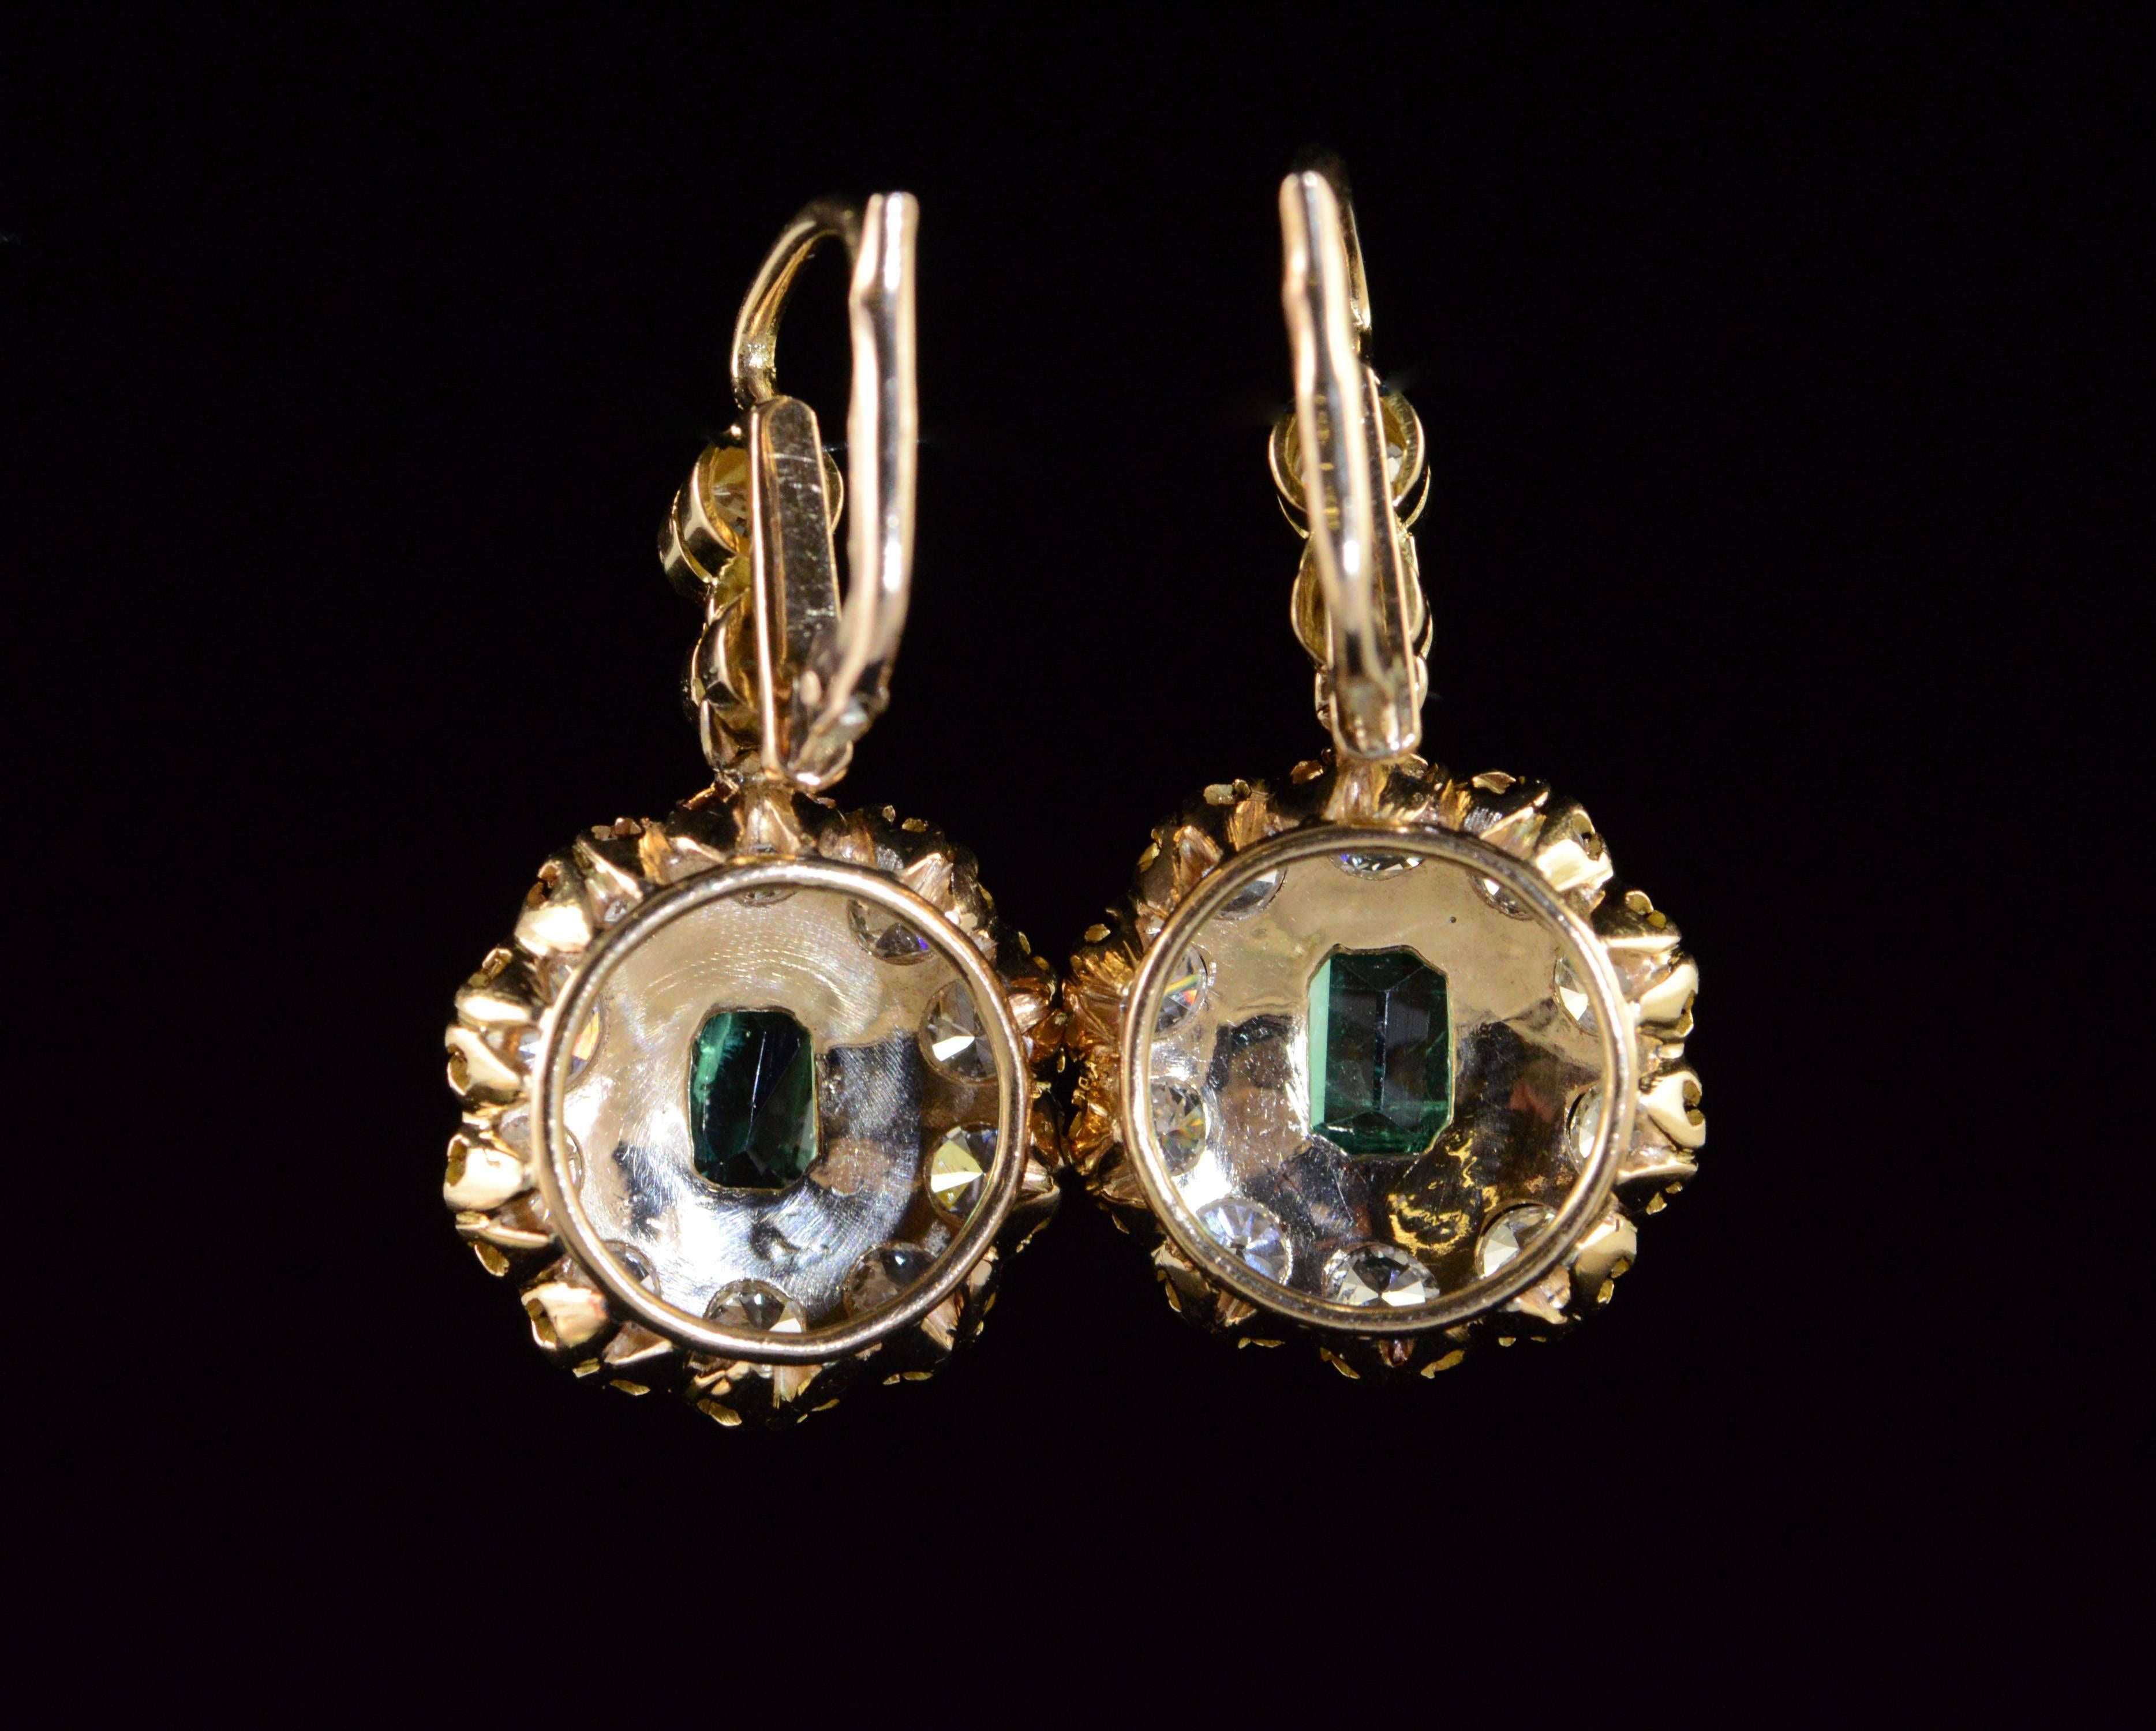  1.50 Carats Emeralds 2.80 Carats Old Mine Cut Diamonds Gold Earrings For Sale 2